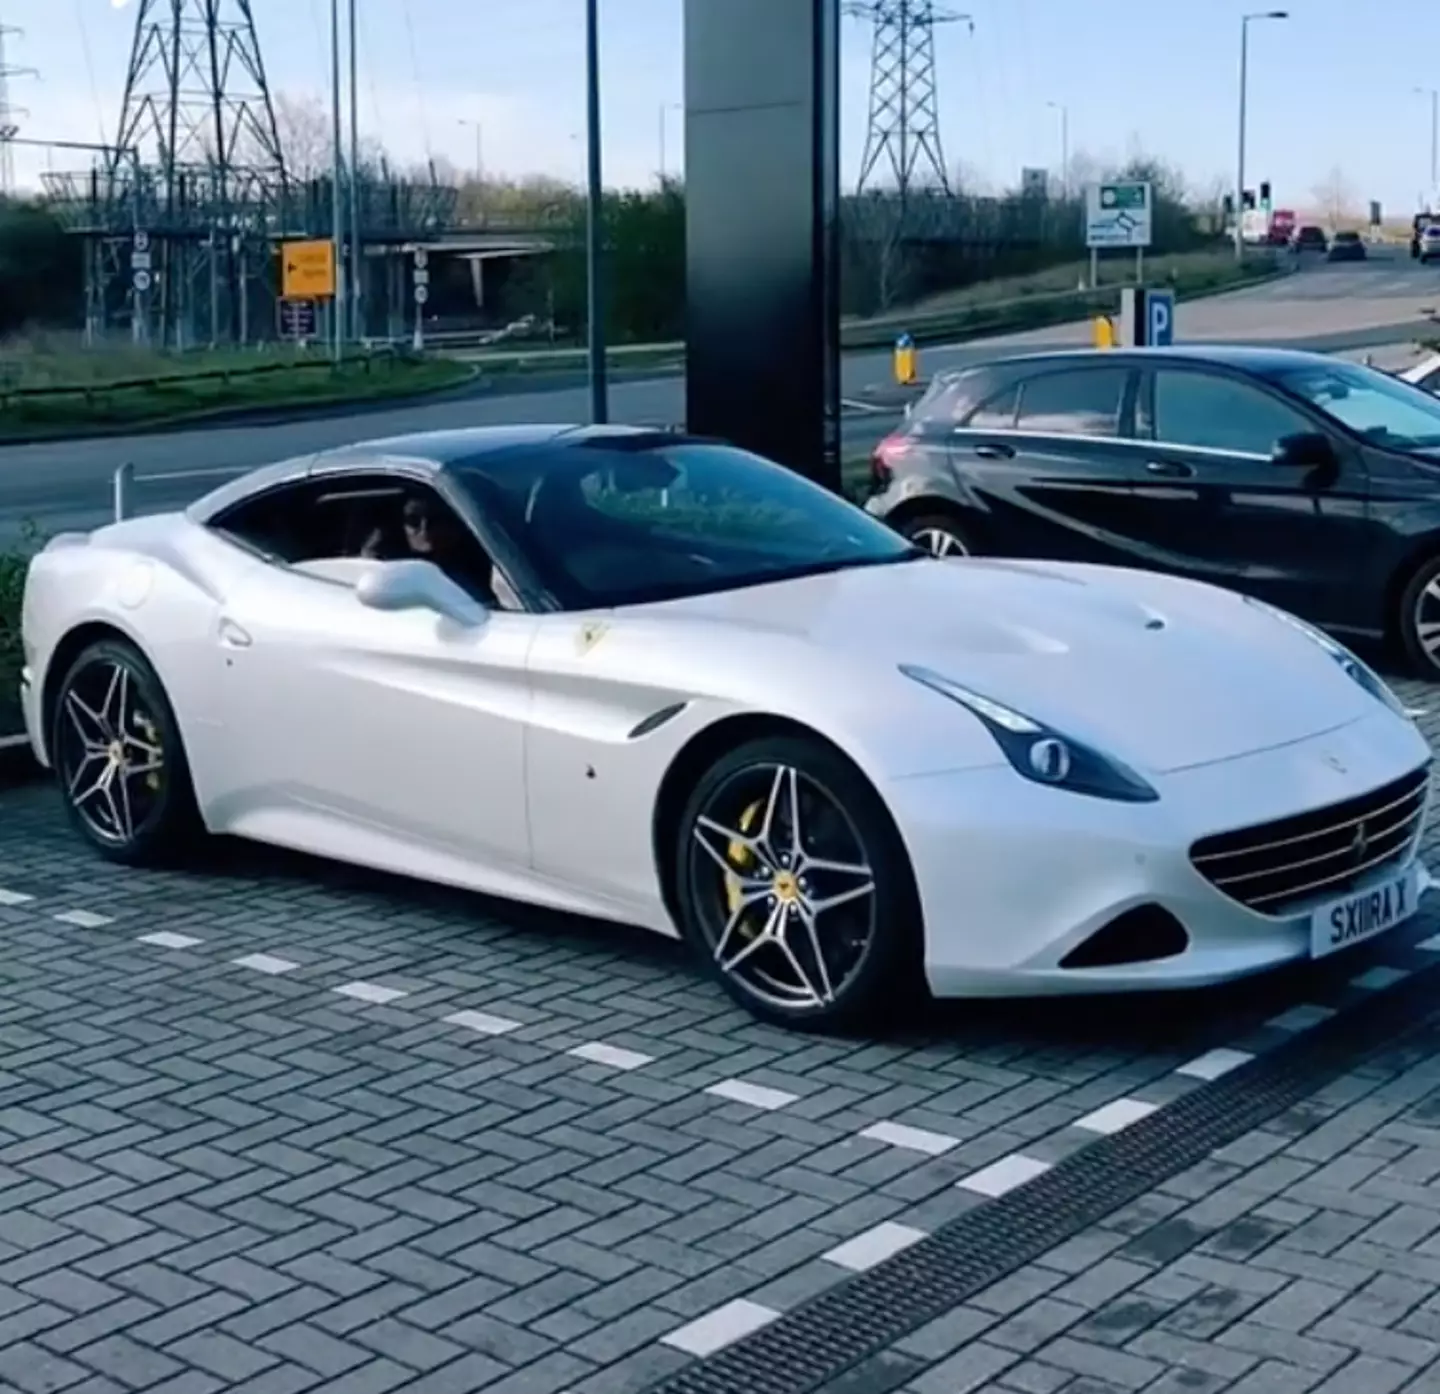 TikToker Saira Haider opens up about how she drives a Ferrari but shops at Aldi and Primark.